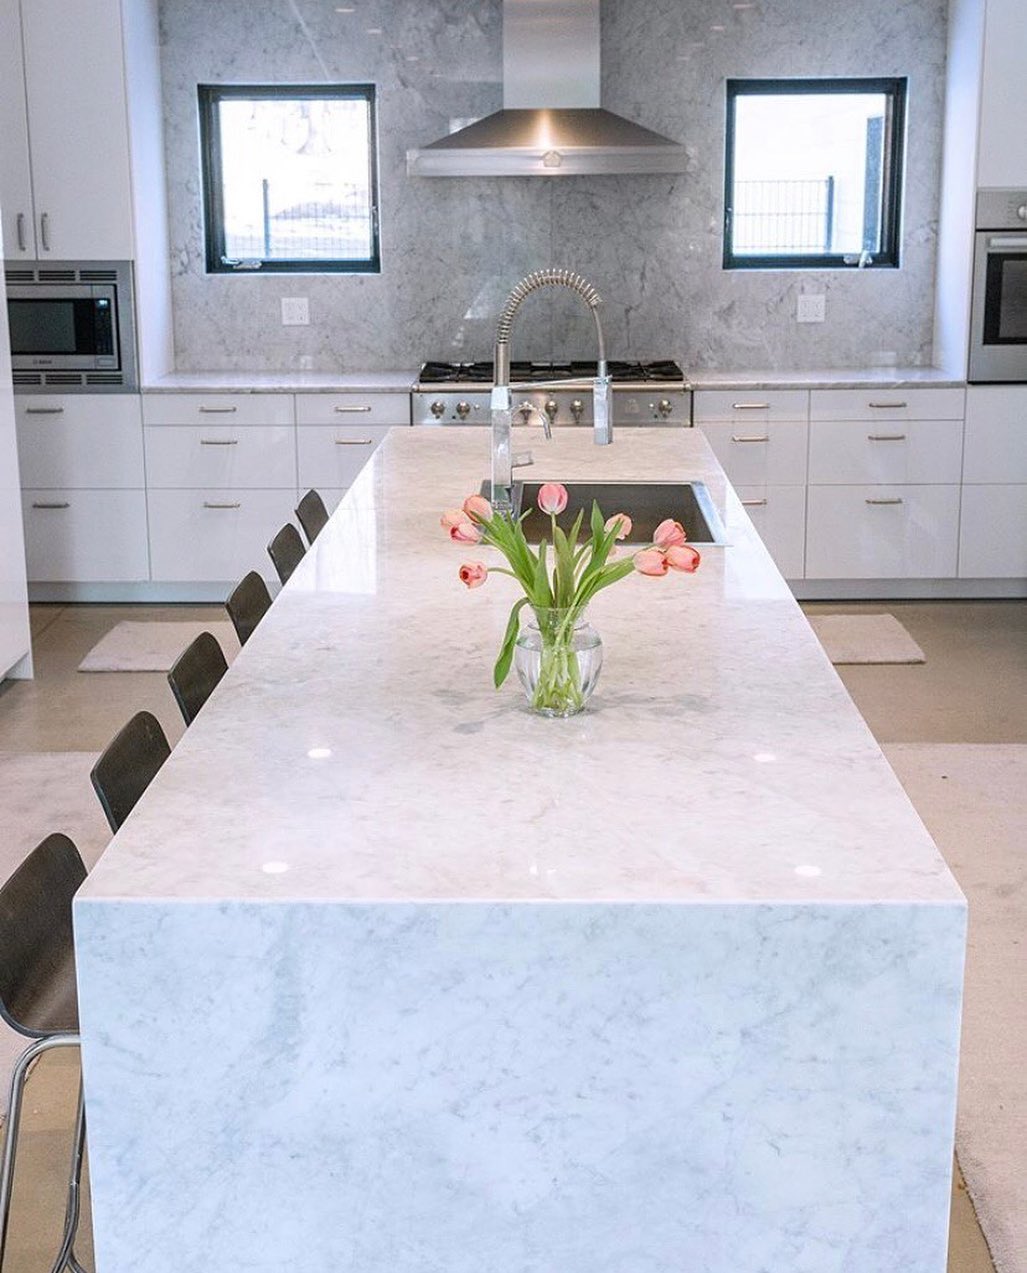 Marble kitchen island. Photo by Instagram user @colonialmarble